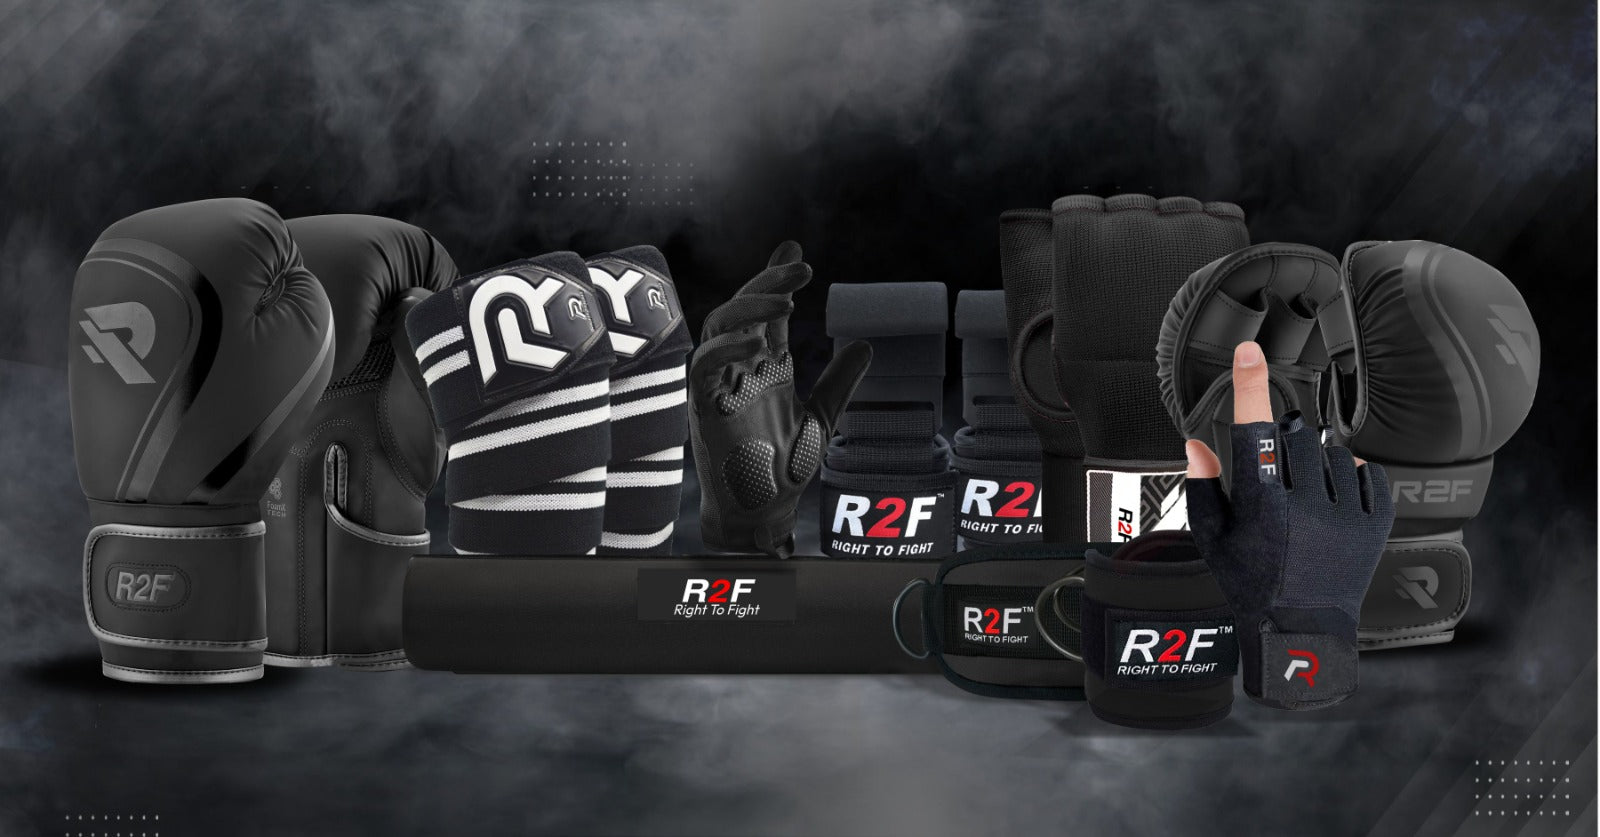 R2F Sports is dedicated to providing top-notch boxing, UFC, MMA, and kickboxing sports equipment to athletes who demand excellence. Our mission is to foster a sense of unity, discipline, and achievement within the combat sports community by offering reliable and stylish equipment that stands up to the demands of intense training and competition. We are committed to continuous improvement, ethical business practices, and creating lasting partnerships with our customers and stakeholders.